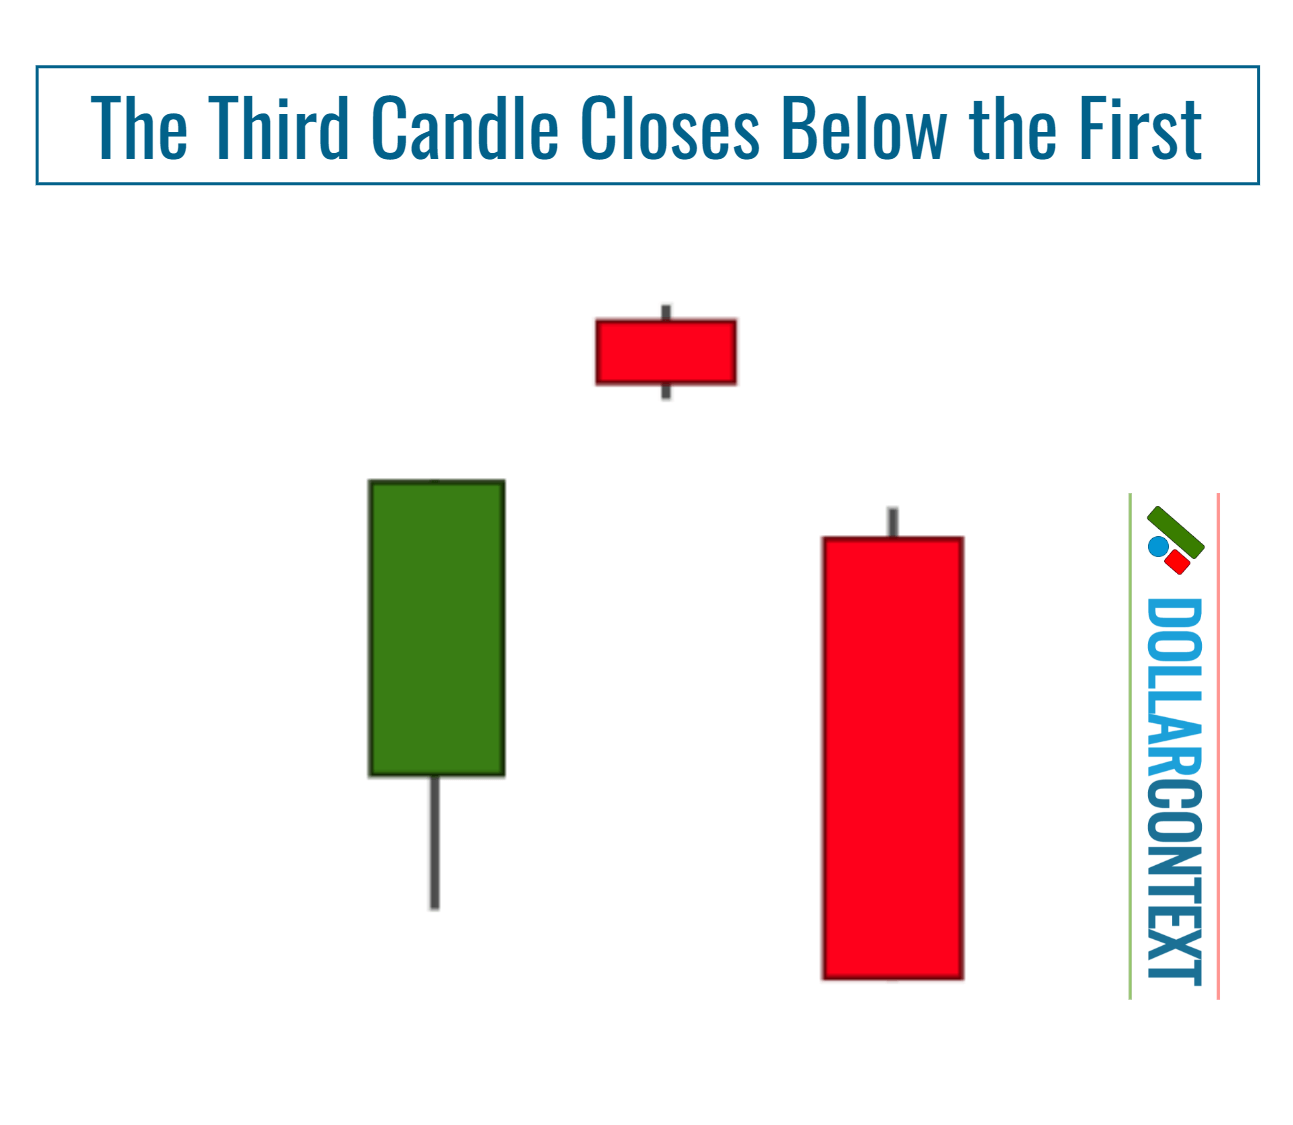 Evening Star Variation: The Third Candle Closes Below the First